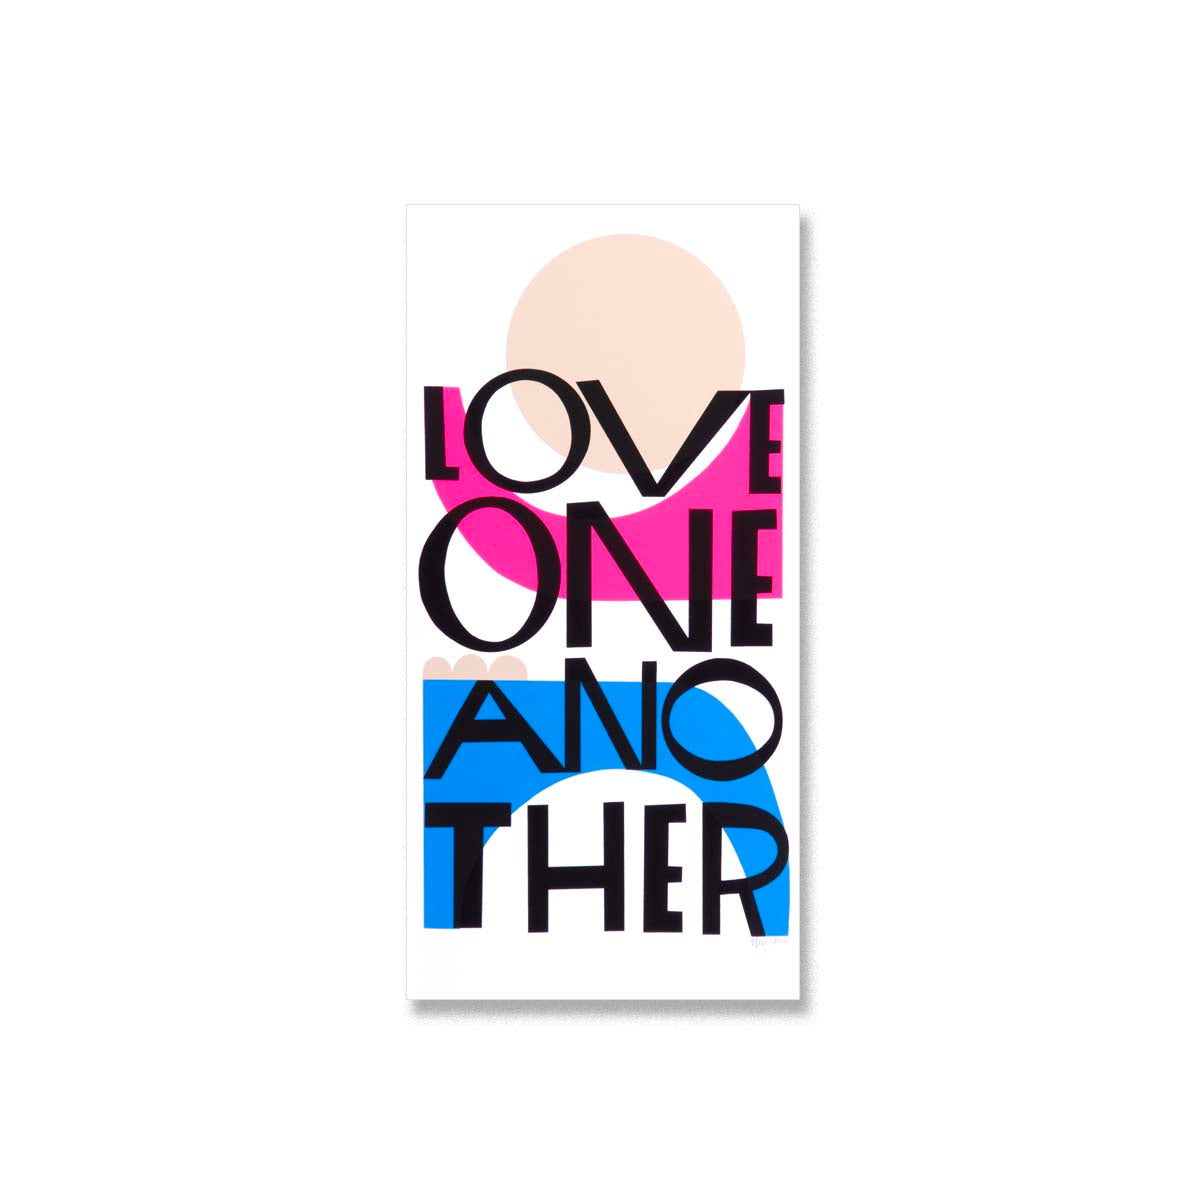 Love One Another - Limited Edition Serigraph